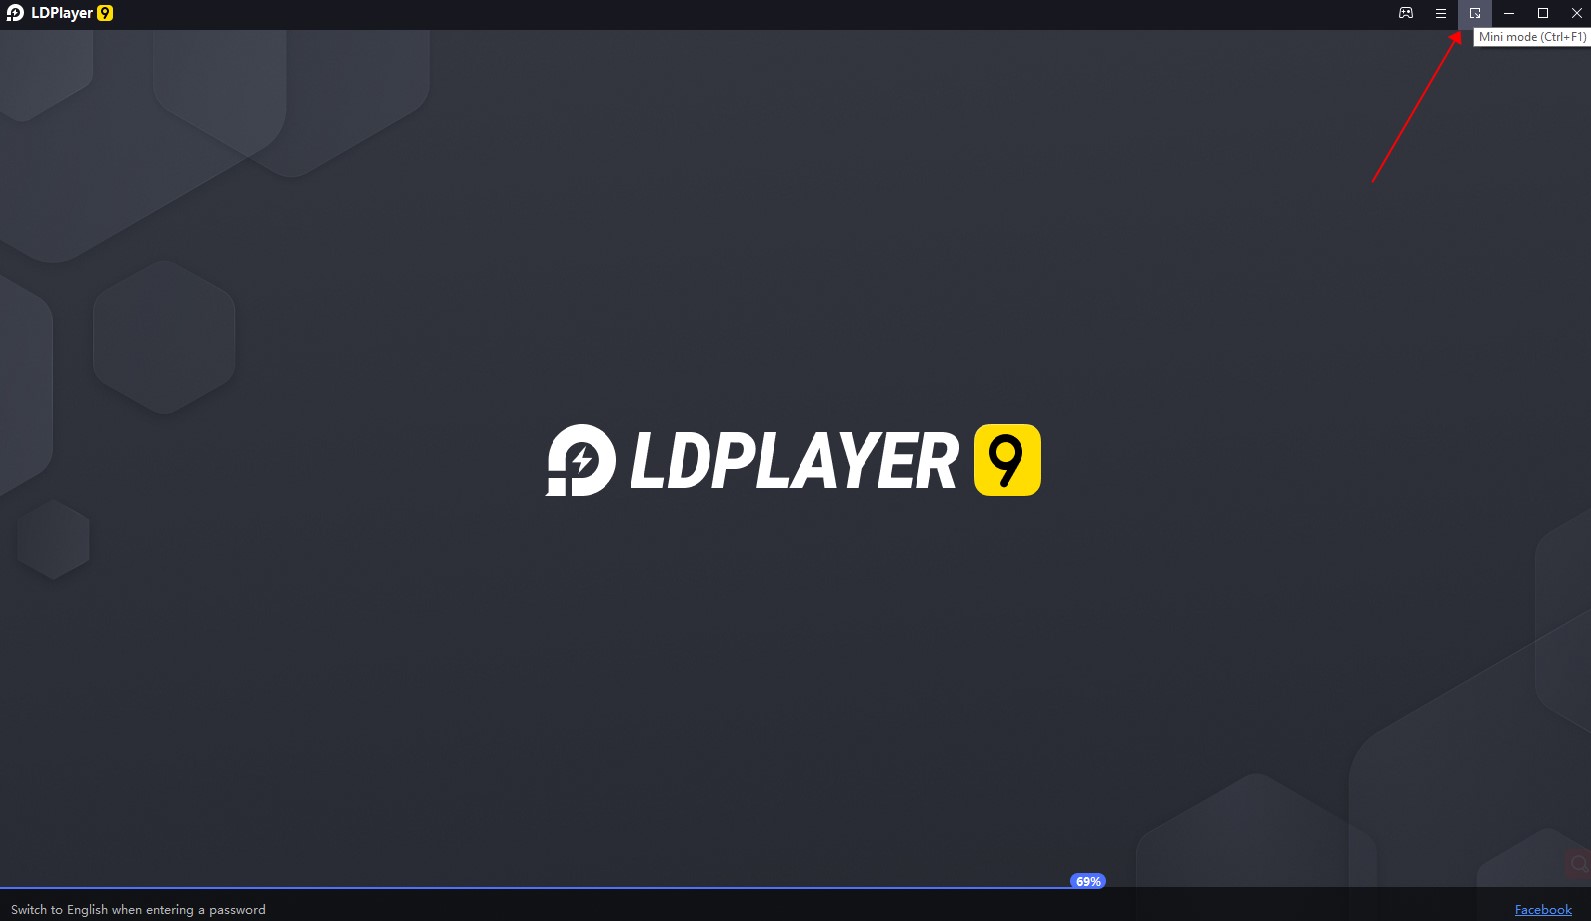 Tips for using LDPlayer